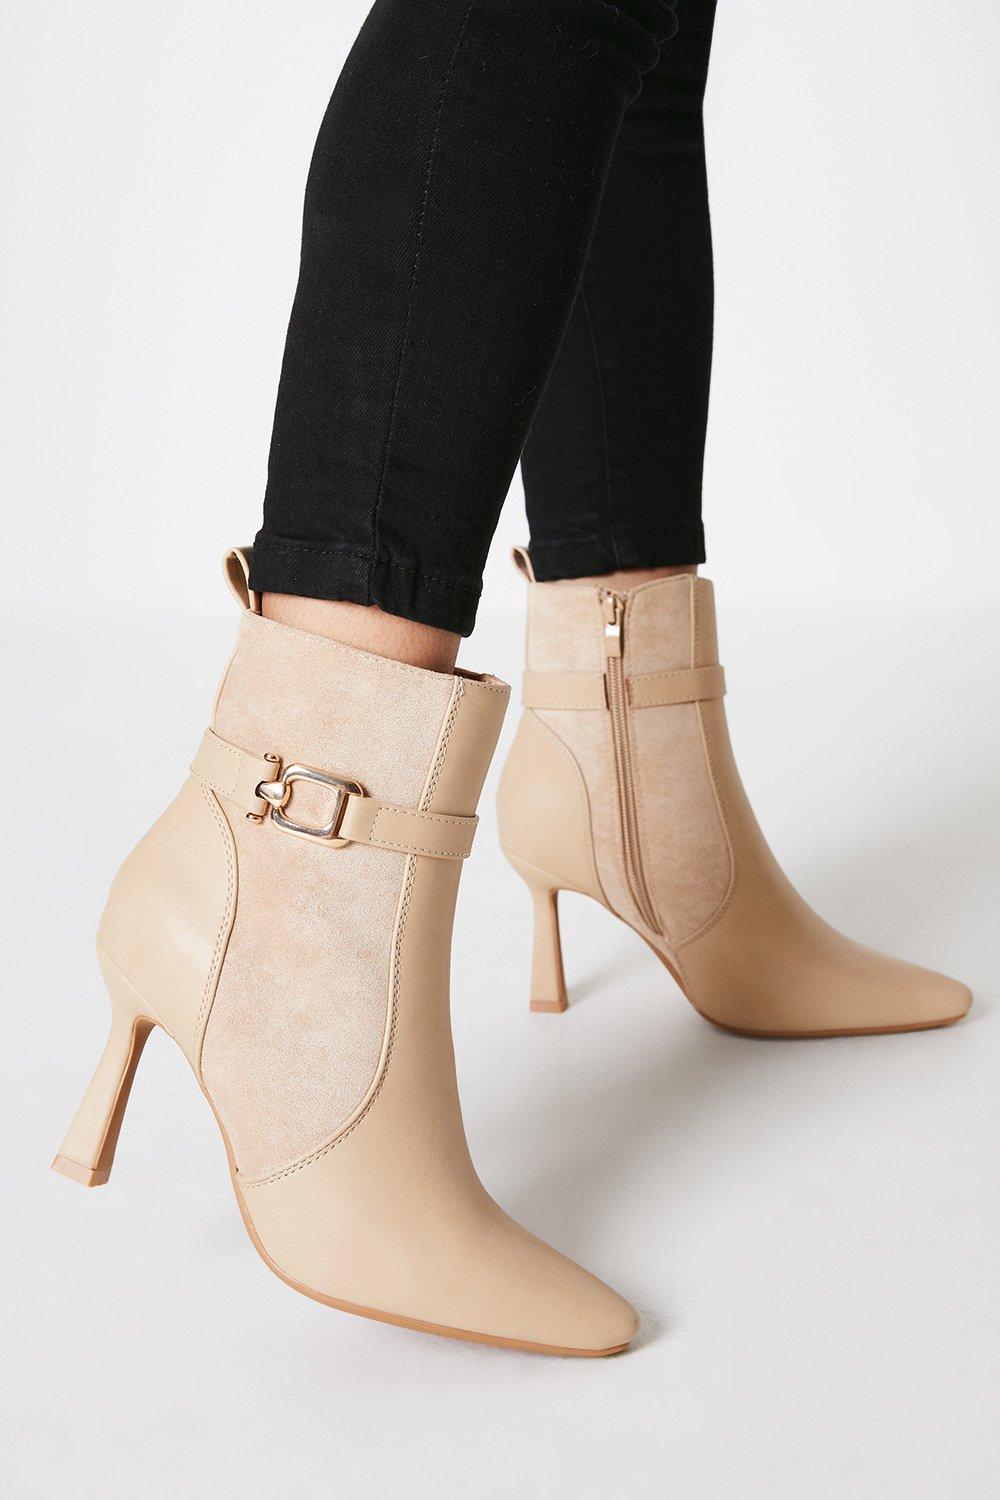 Women’s Faith: Madra Pointed Buckle High Heeled Ankle Boots - beige - 4